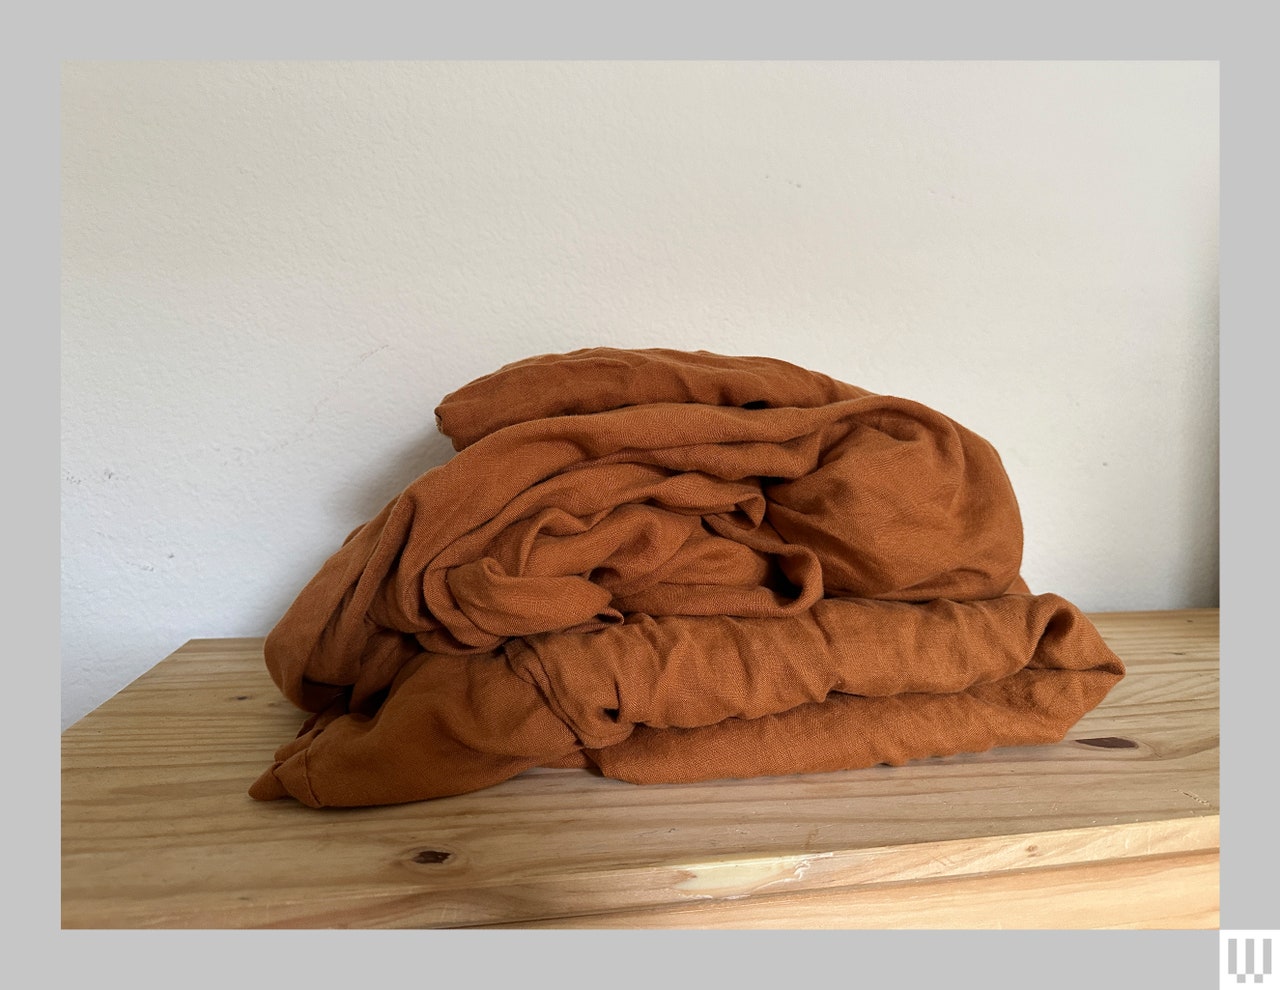 Balled up rust colored linen sheets sitting on a wooden surface in front of a white wall